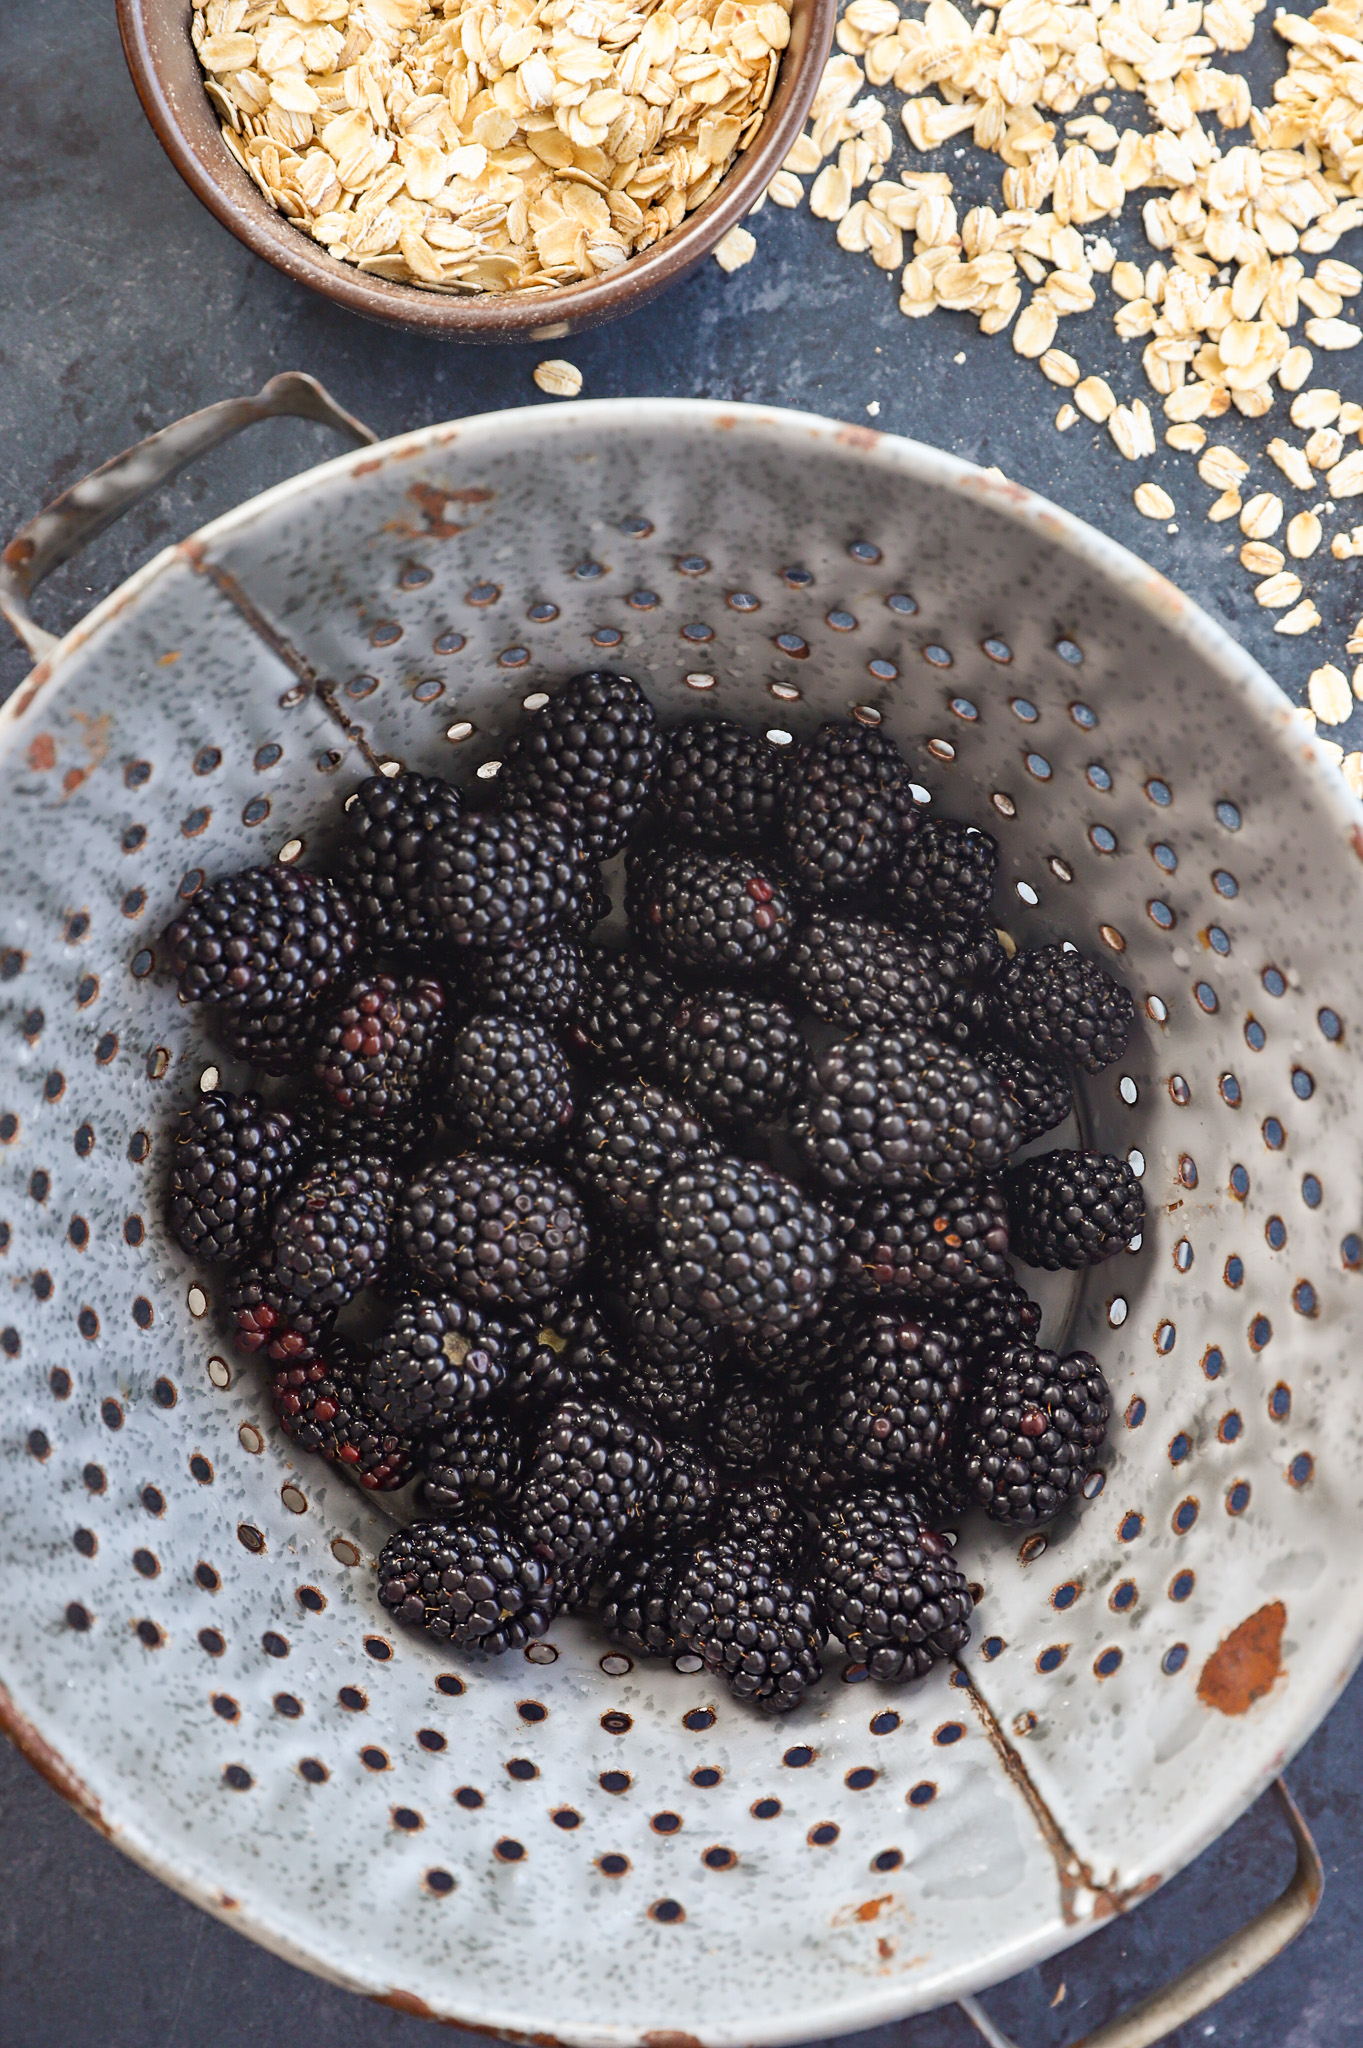 freshly washed blackberries in a colander with oats on the side